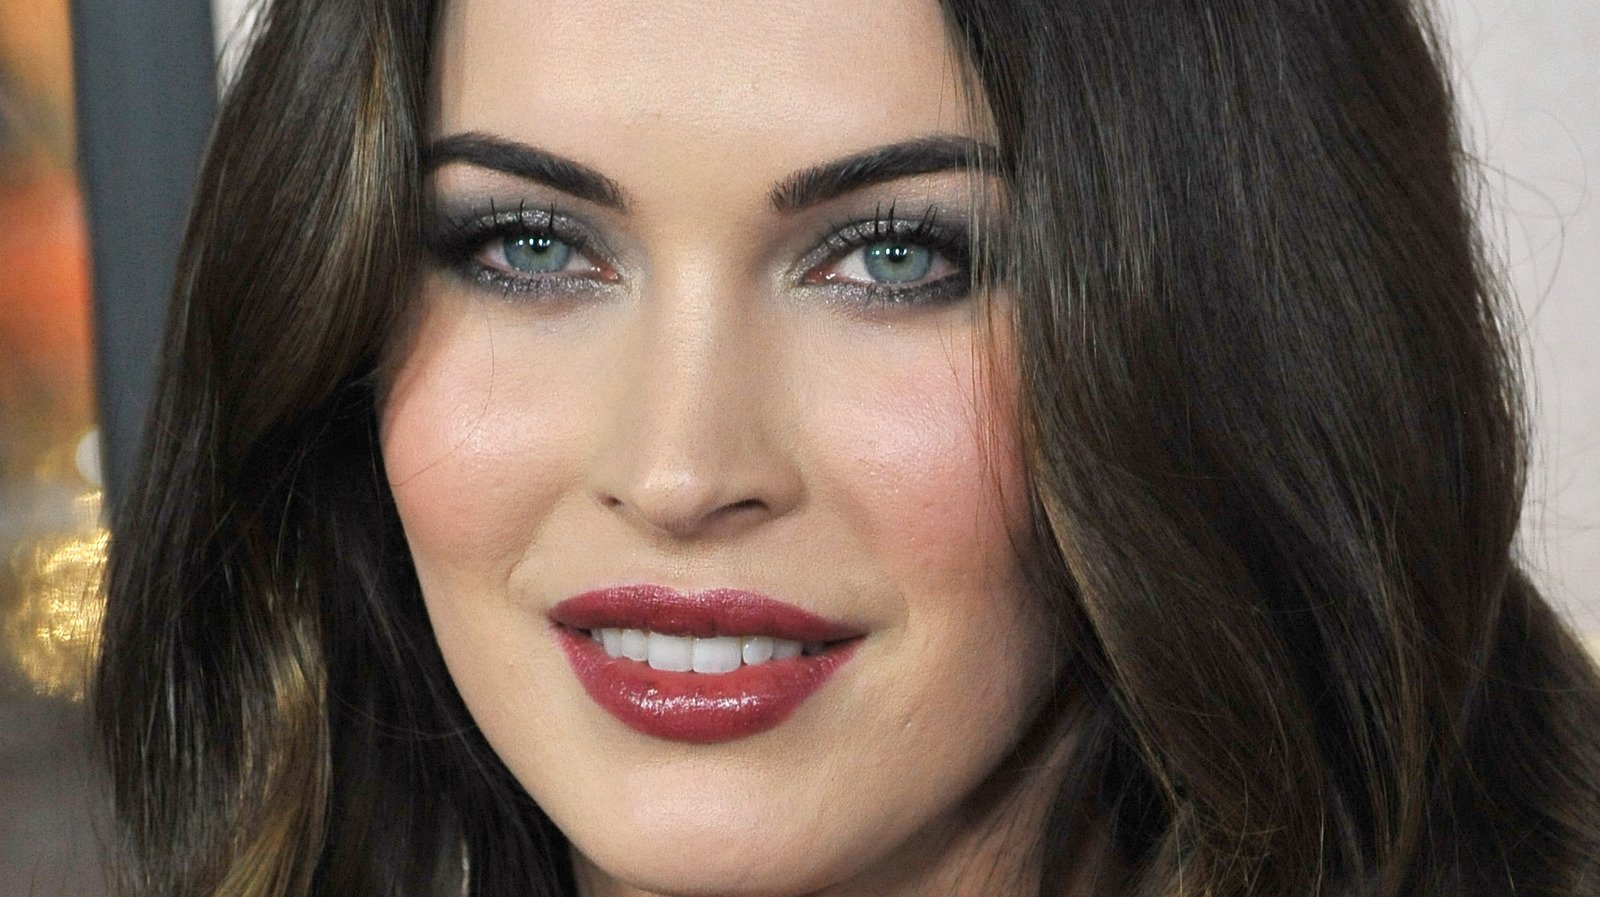 Here's What Megan Fox Looks Like Going Makeup-Free - The List